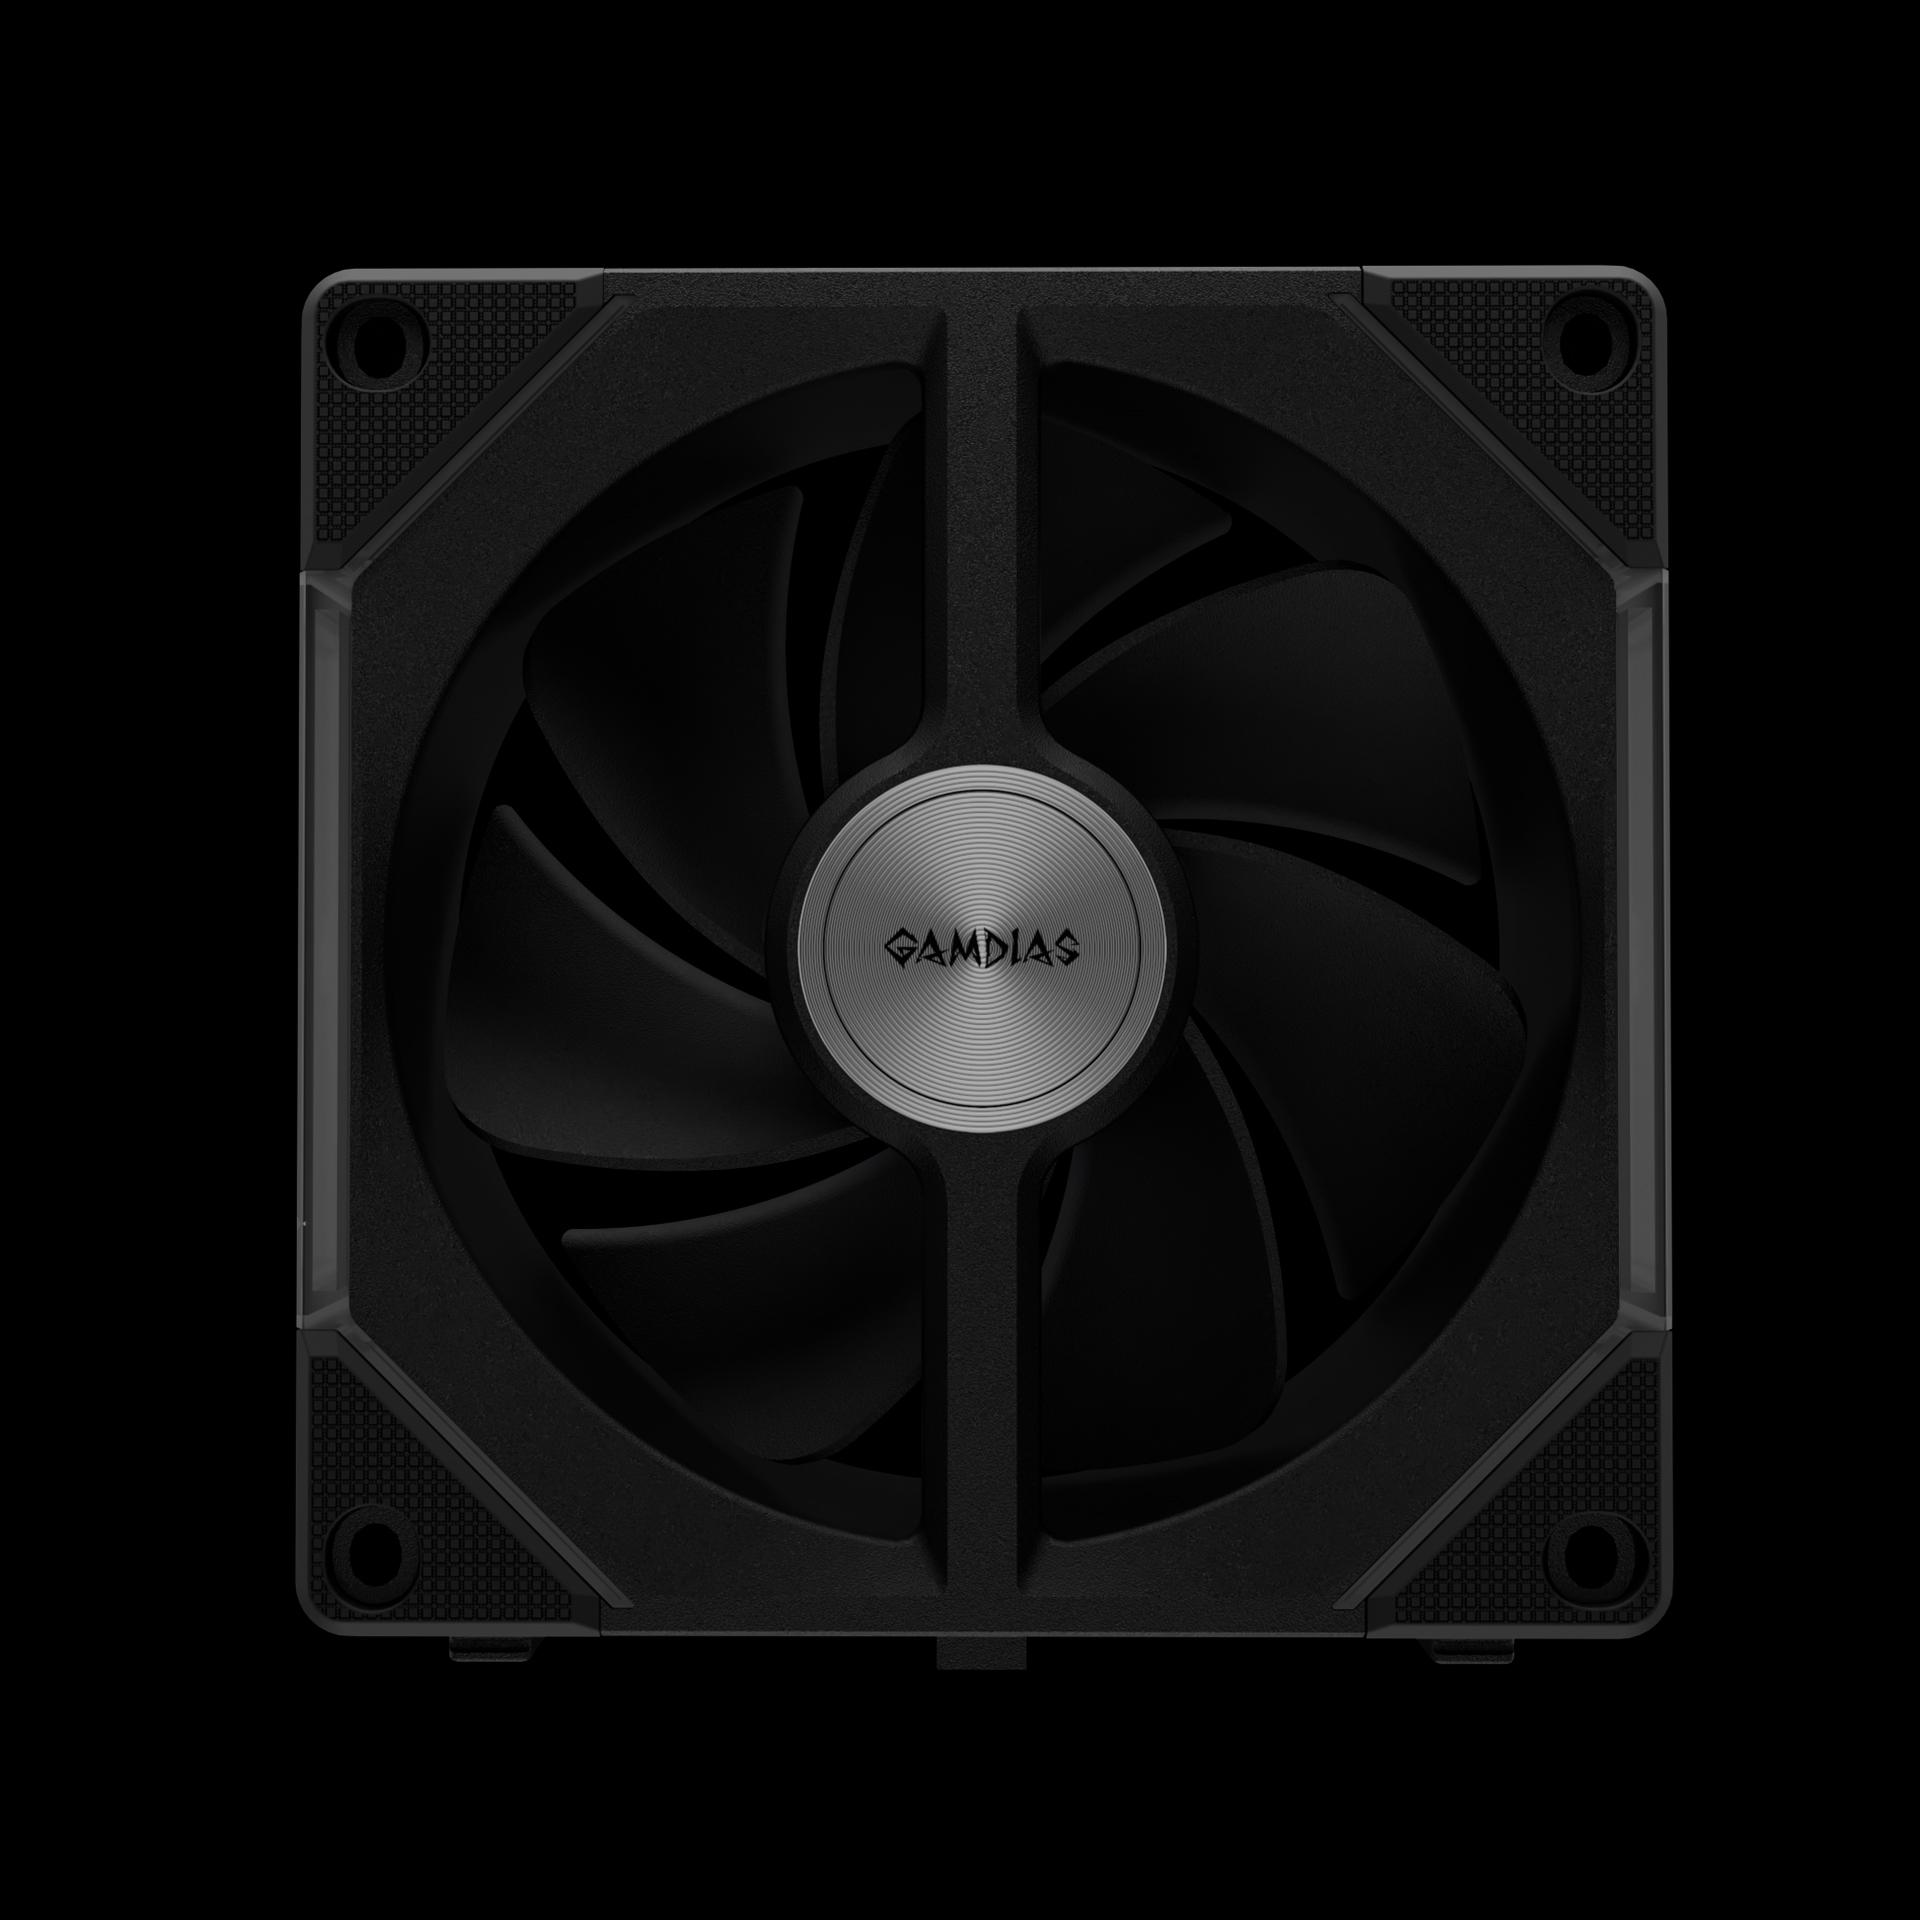 GAM-P2-1203U GAMDIAS 120mm ARGB PC Case Fans GAMDIAS AEOLUS P2-1203U 120mm ARGB PC Case Fans, Cable-less Daisy Chain Connection, Dual Infinity Mirror Lighting, Swappable Fan Blade for Reverse Airflow, Performance 30mm Thick, With Controller